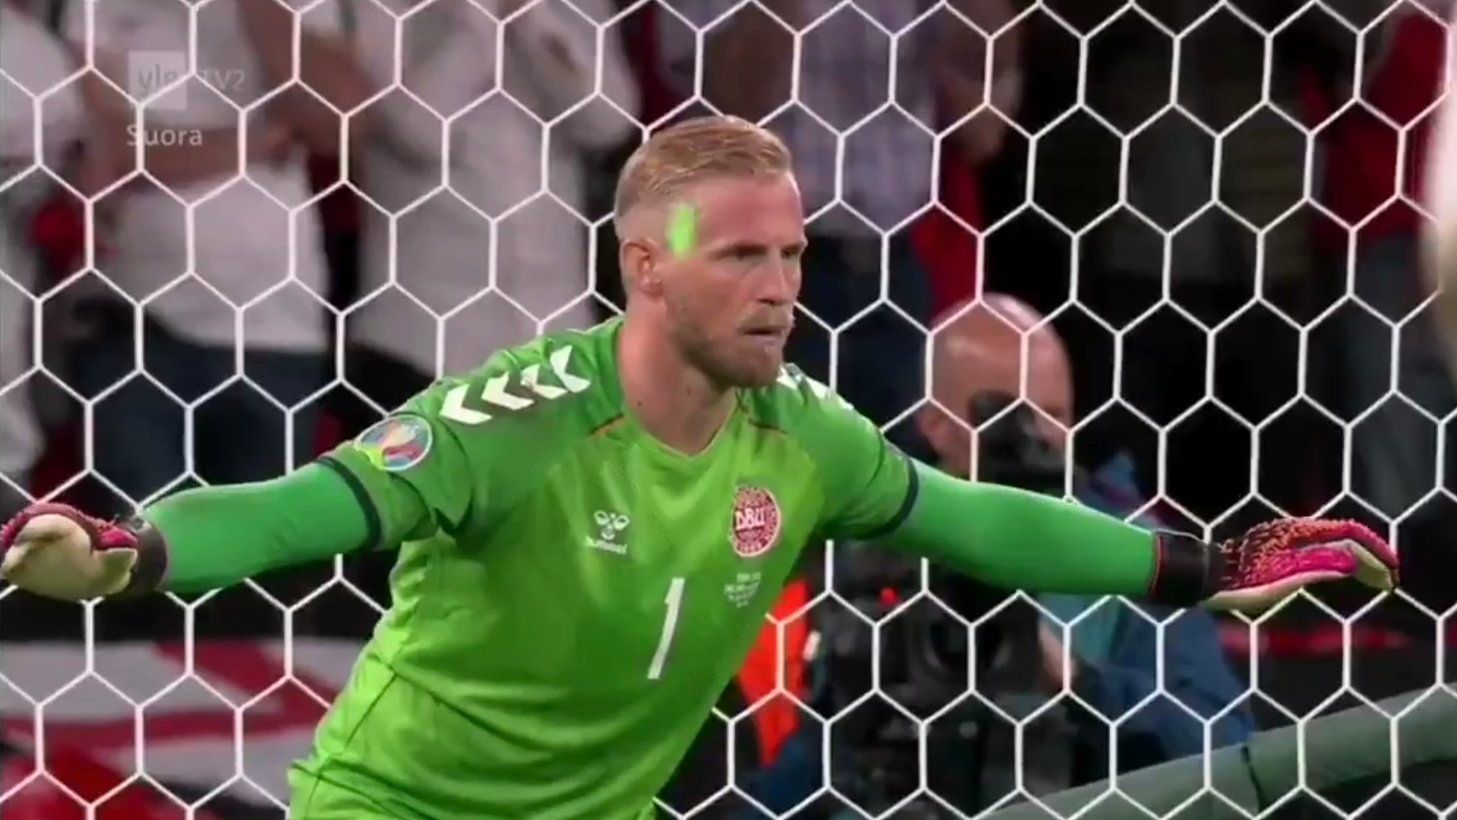 Laser%20flashes%20at%20Denmark%20keeper%20Schmeichel%27s%20face%20moments%20before%20Kane%27s%20penalty%20%7C%20Watch